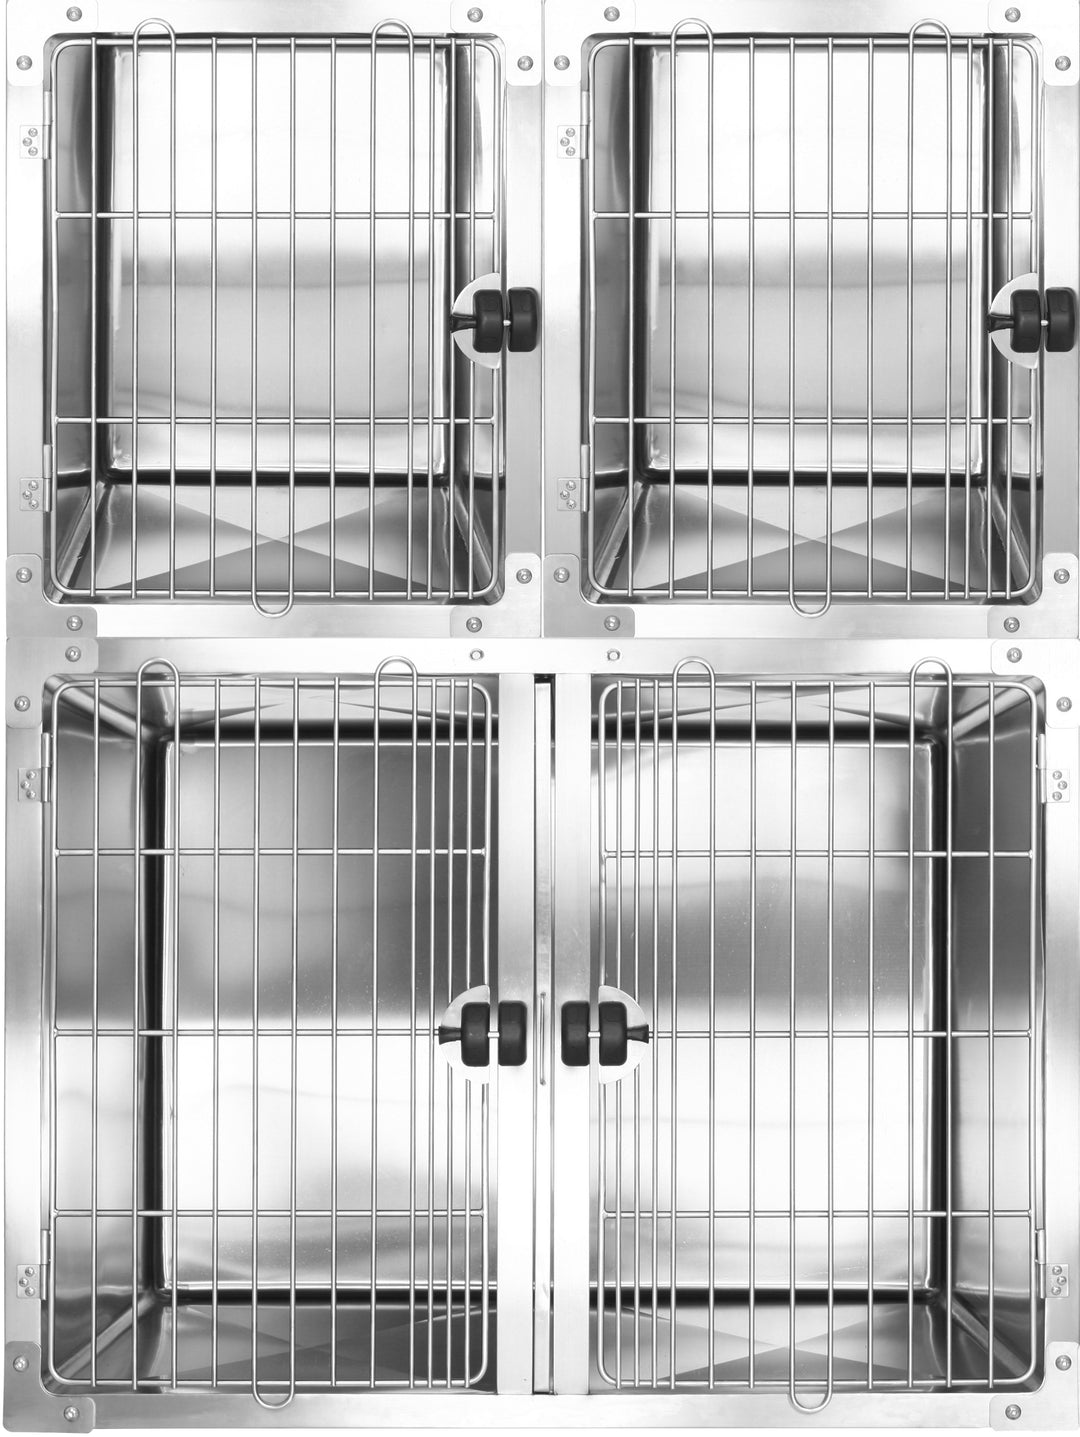 Aeolus Stainless Steel Round Corner Modular Cage-Two-Tier (1L + 2M) with drainage system - abkgrooming